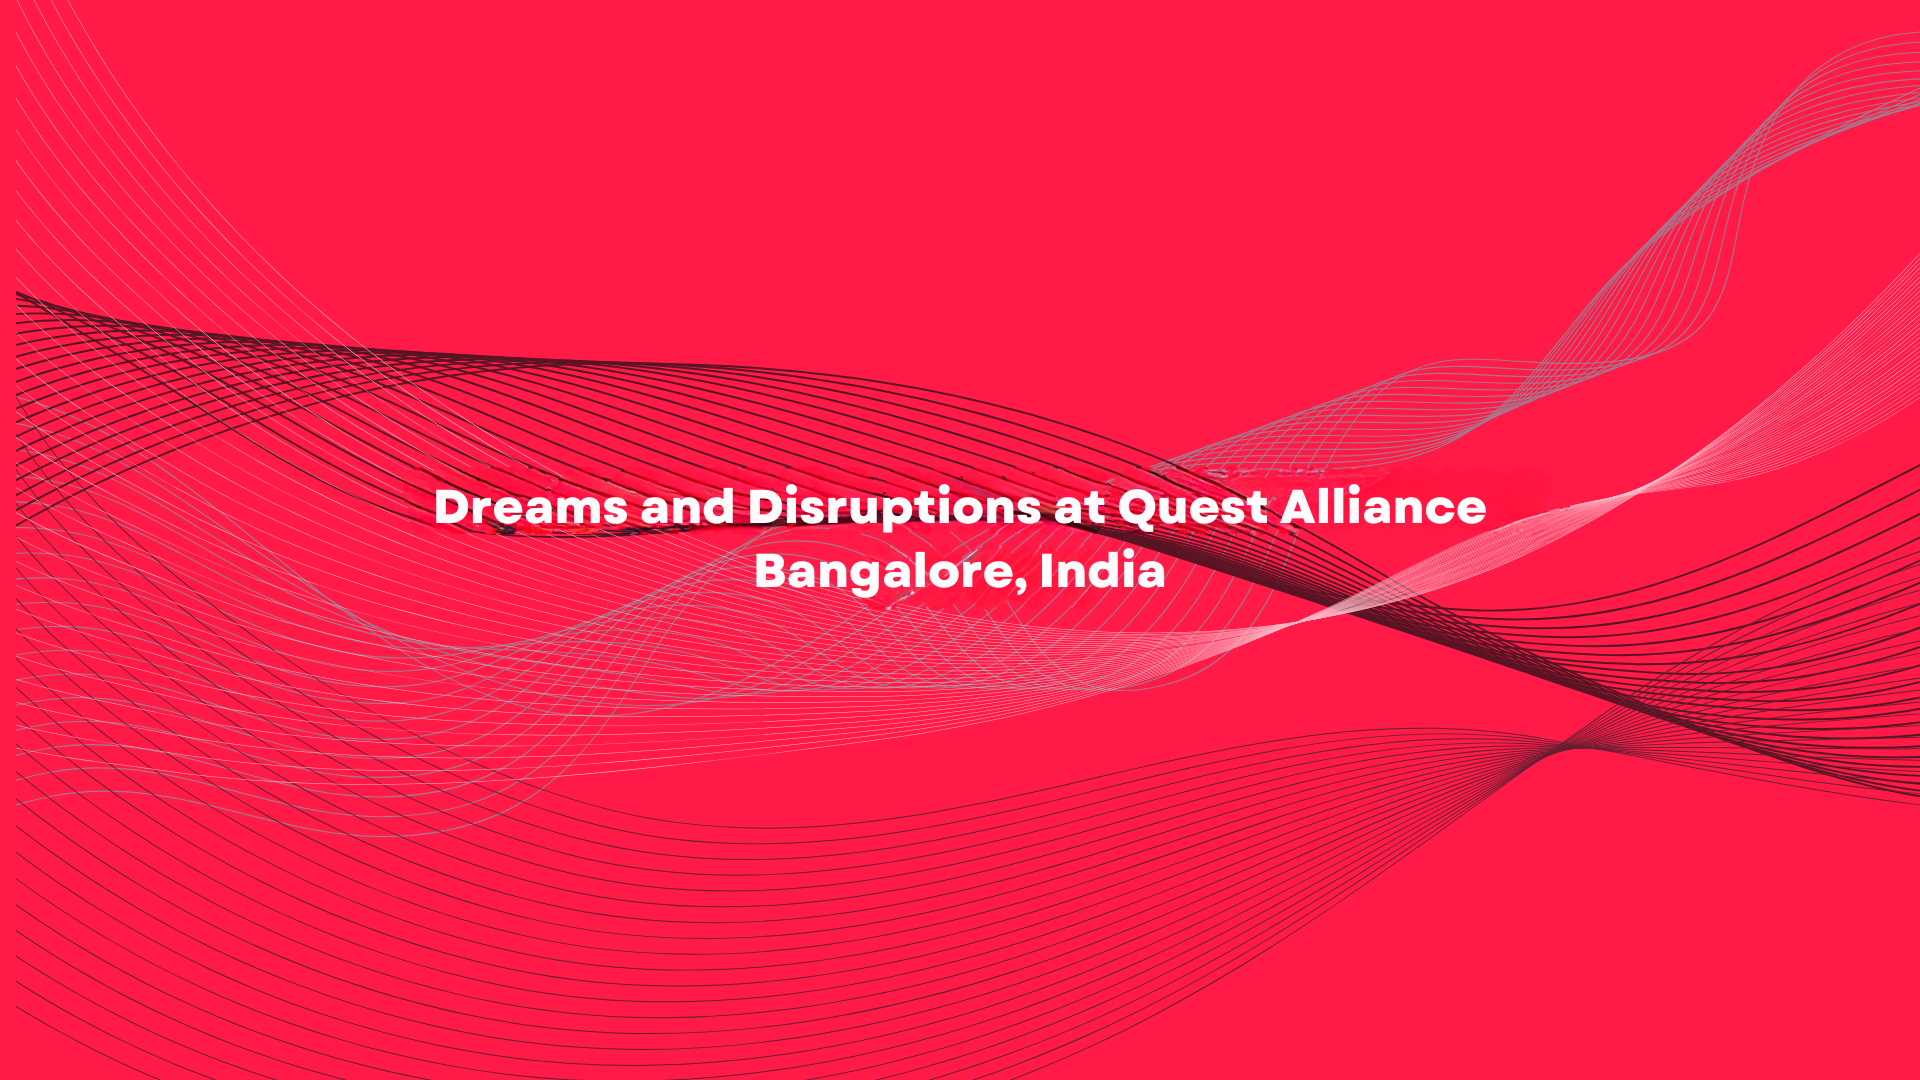 Dreams and Disruptions at Quest Alliance Bangalore, India